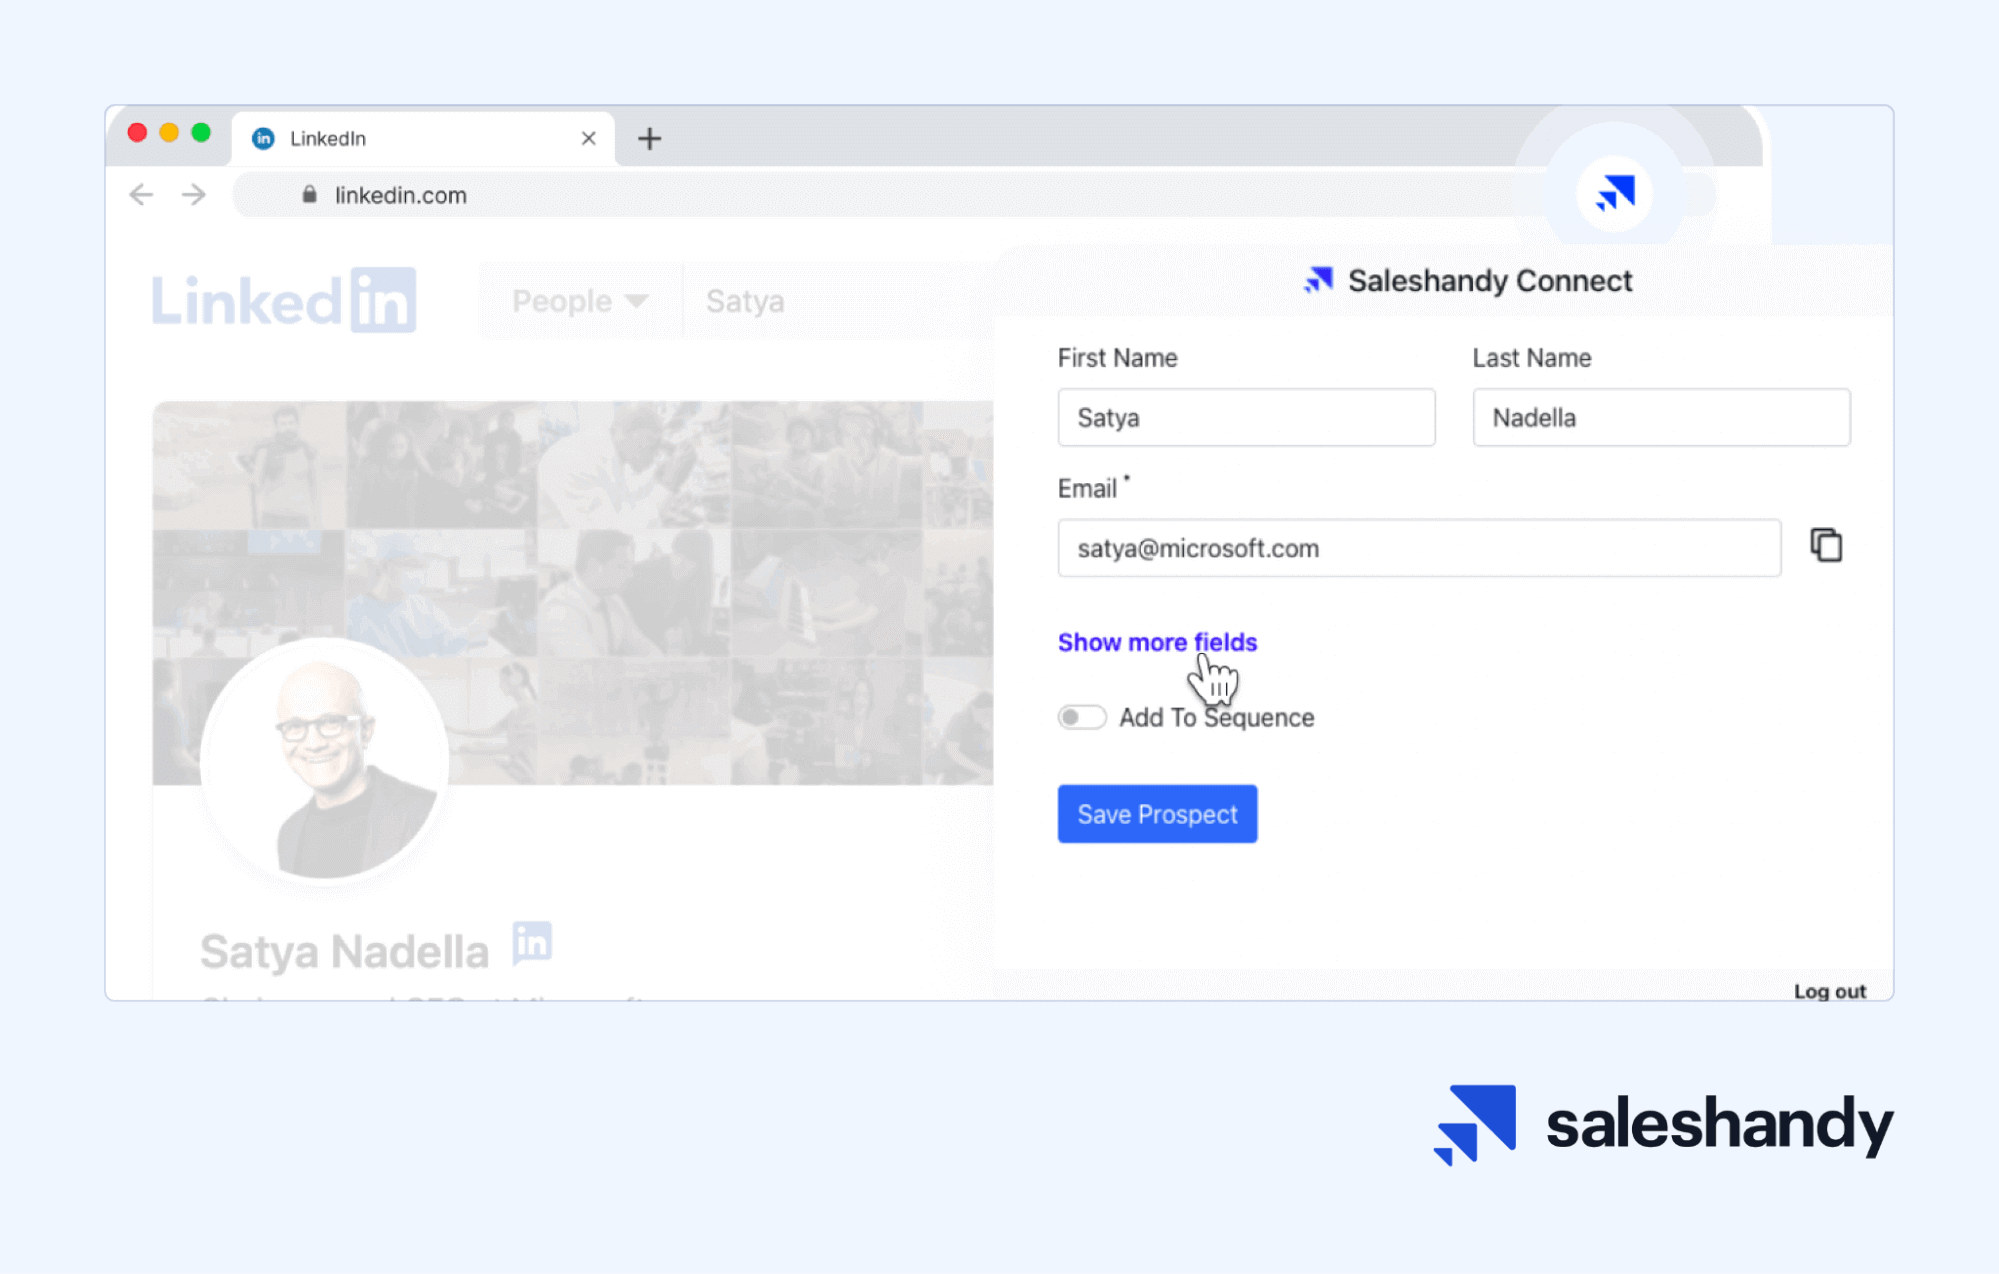 An image showing saleshandy connect's user interface